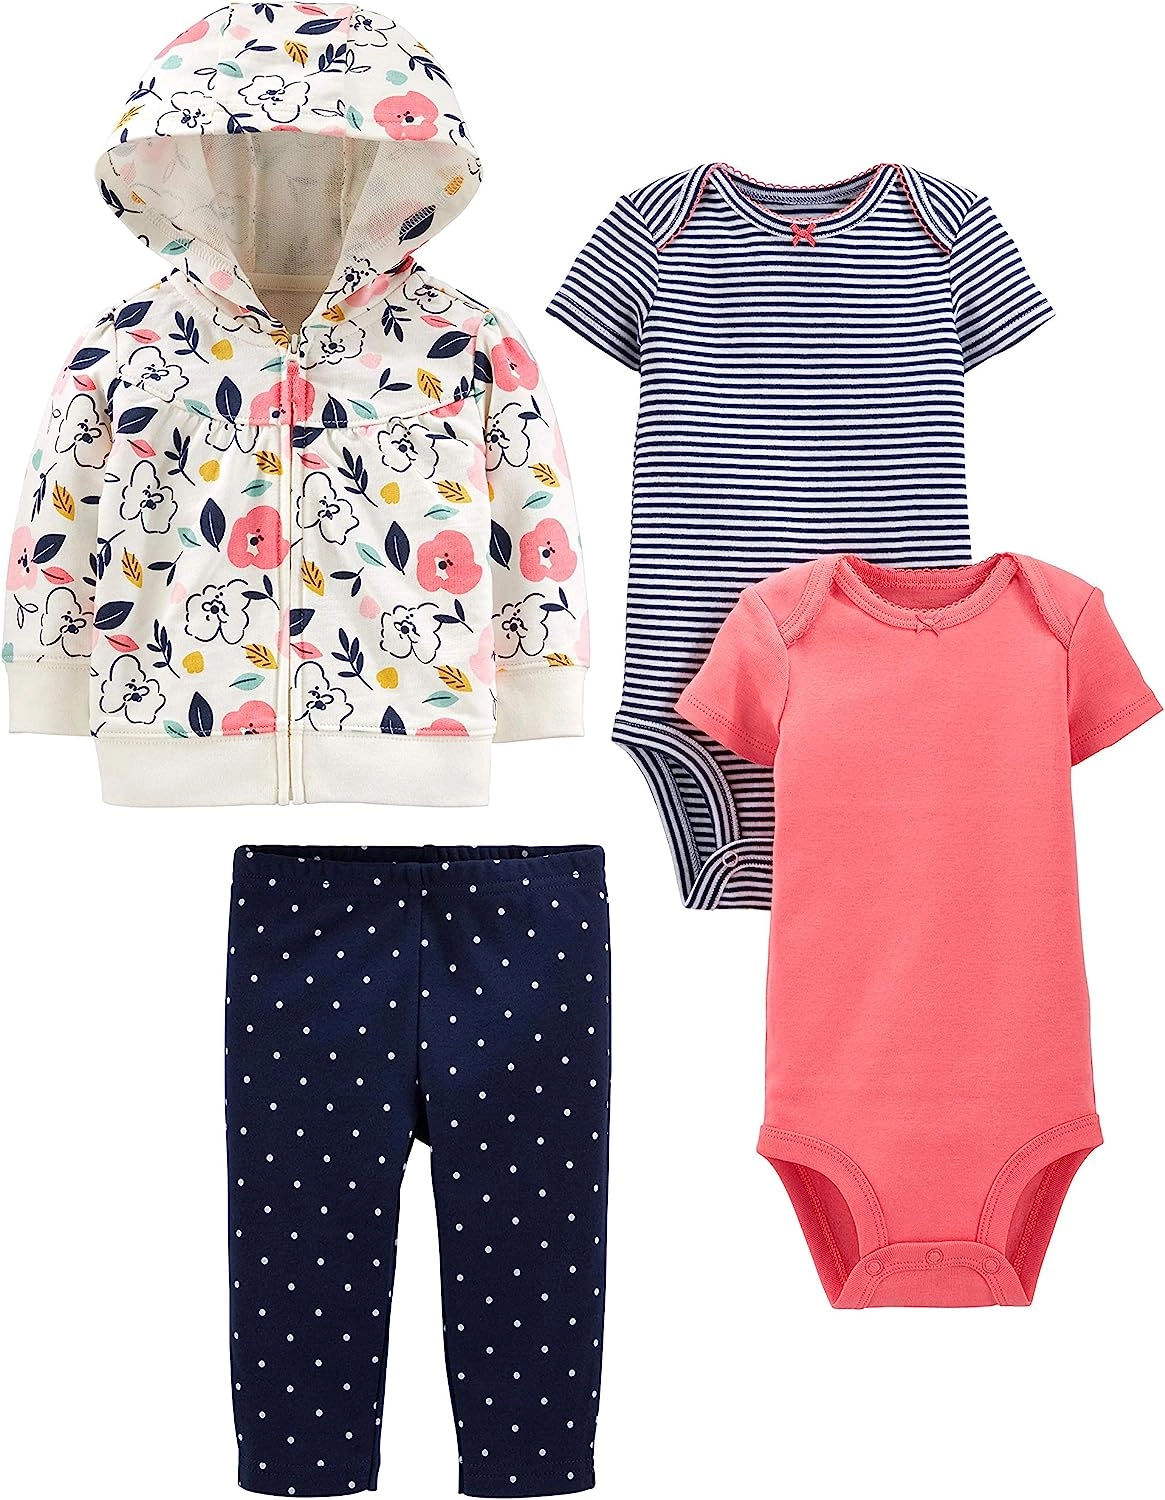 Baby Jacket, Pant, And Bodysuit Set From Bangladesh Factory